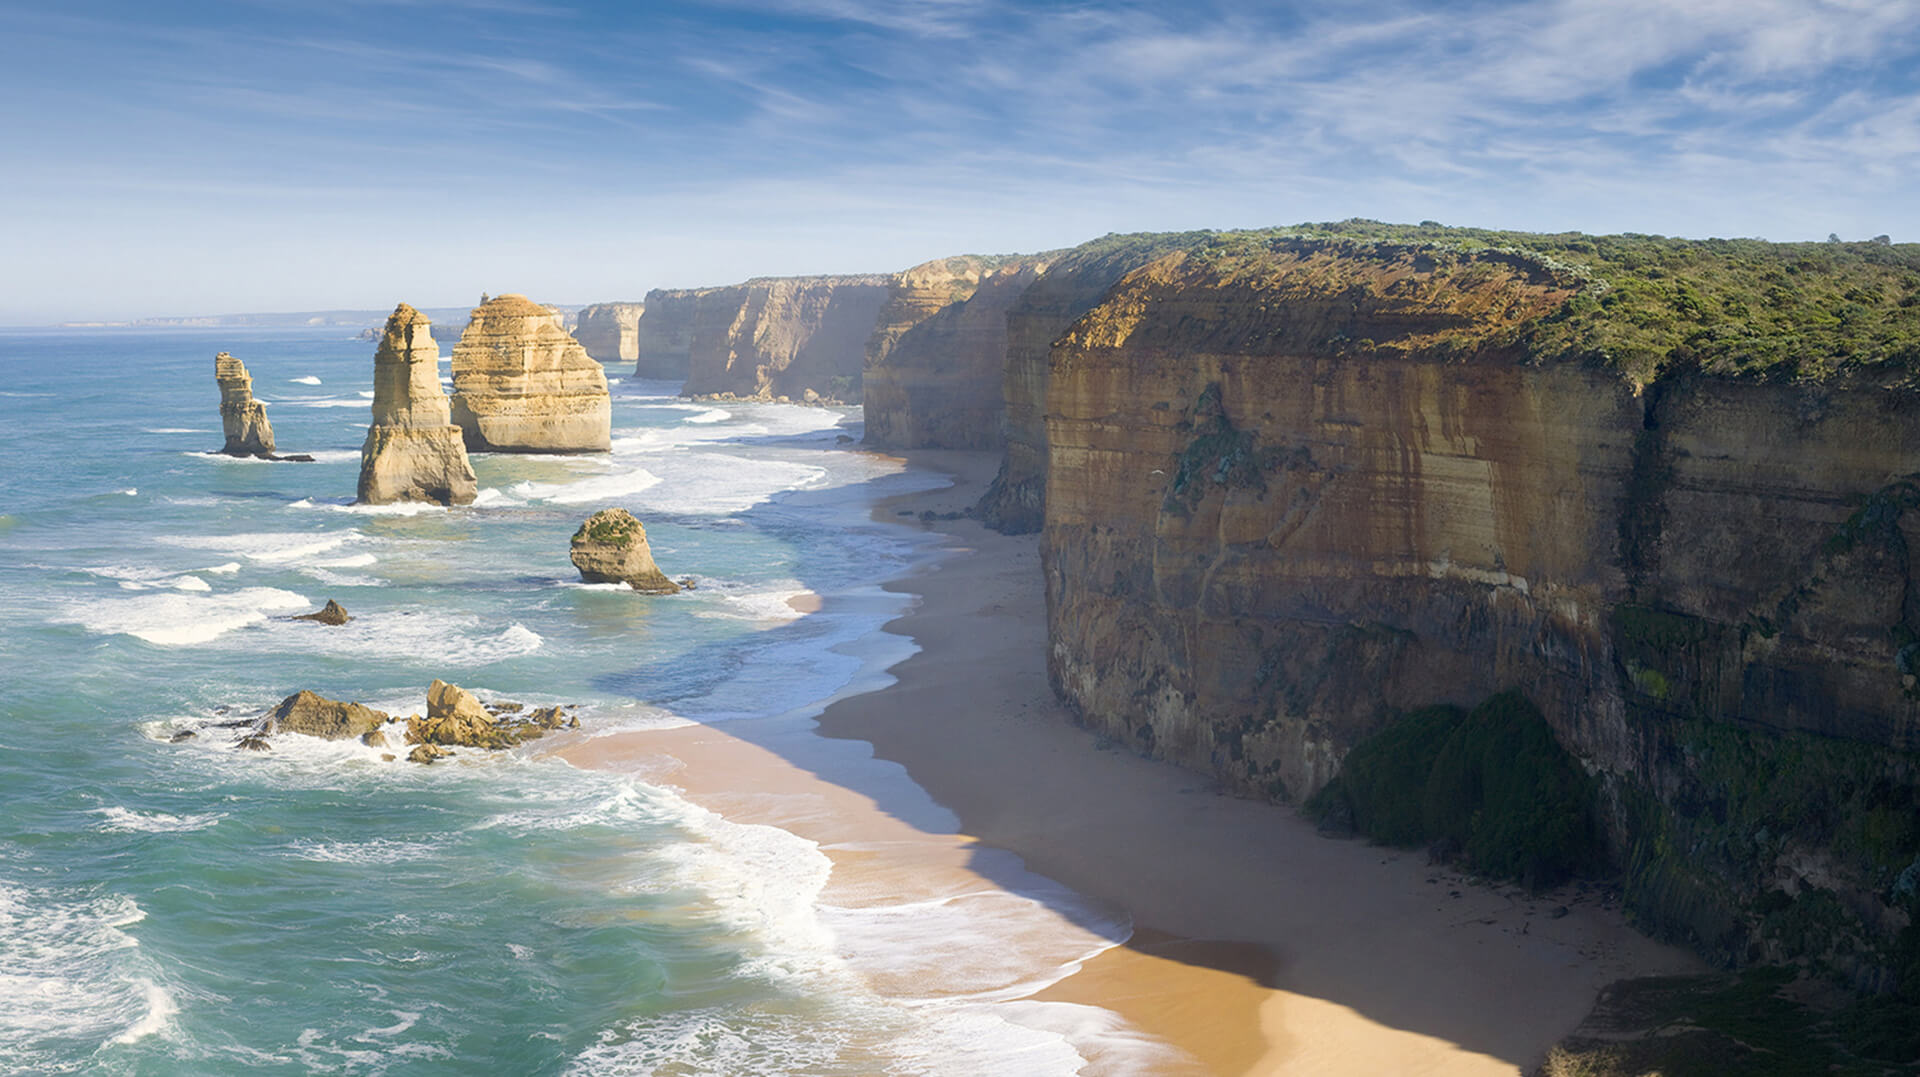 Enjoy the adventure of Great Ocean Road tour in Melbourne